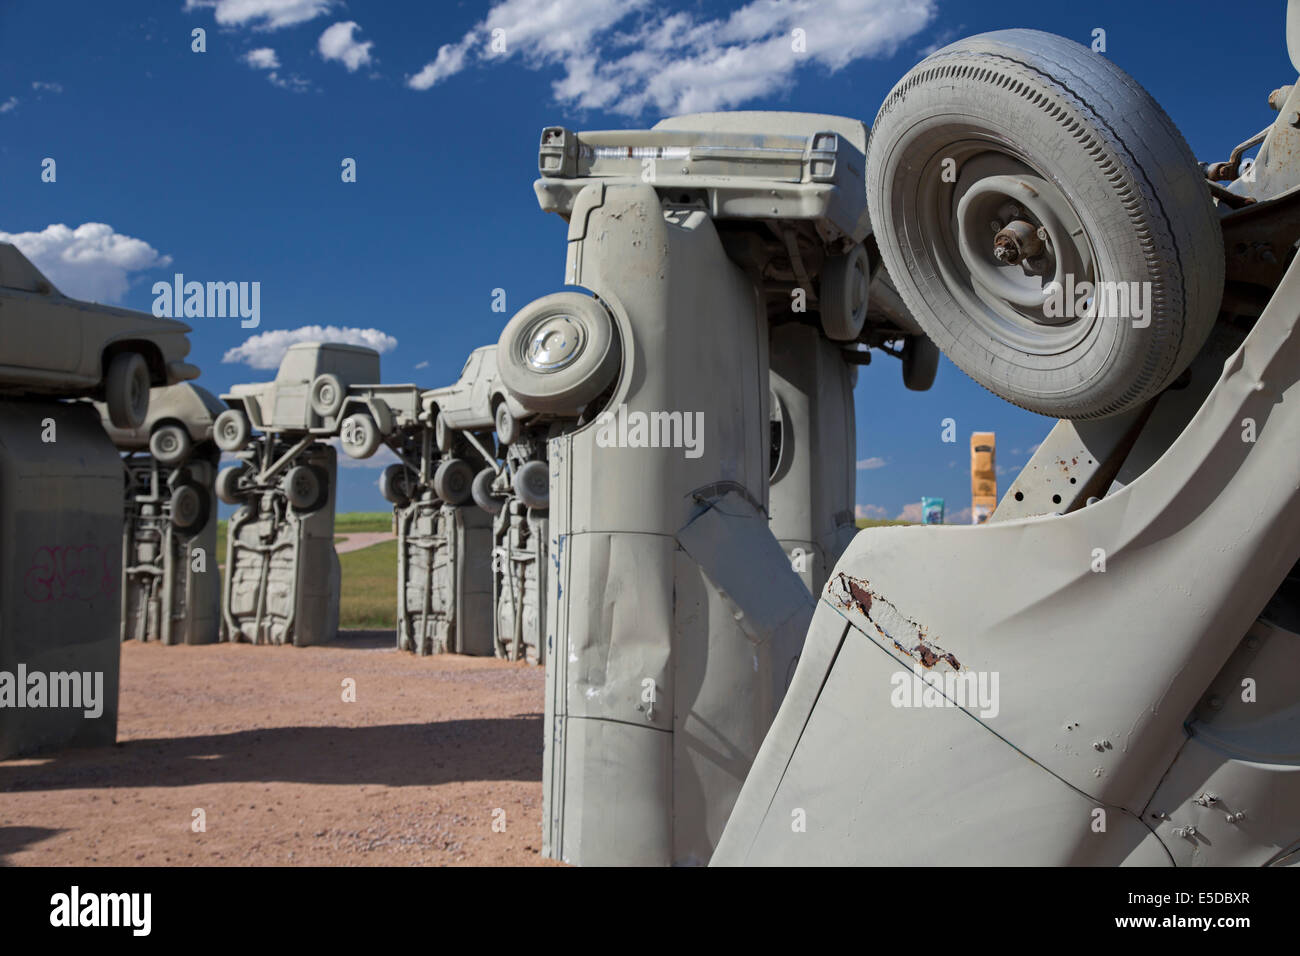 Alliance, Nebraska - Carhenge, a circle of old cars bolted together and half buried in the ground. Stock Photo